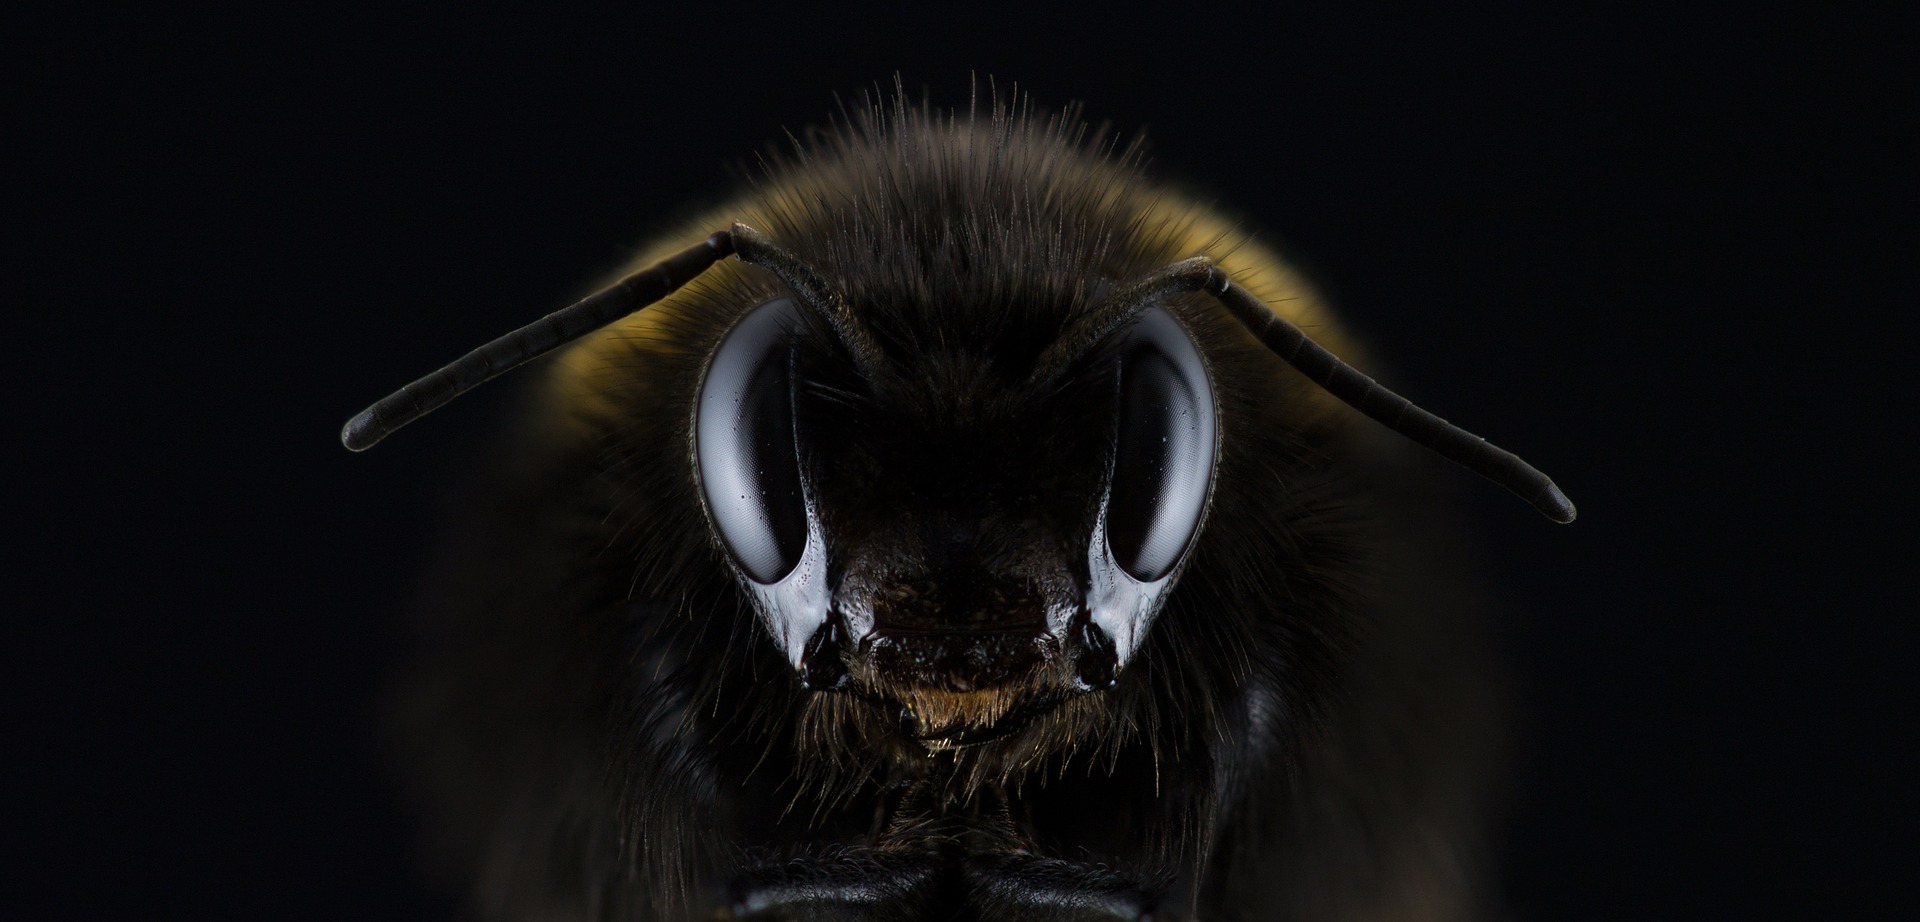 Dark image displaying a bee's frontal body/